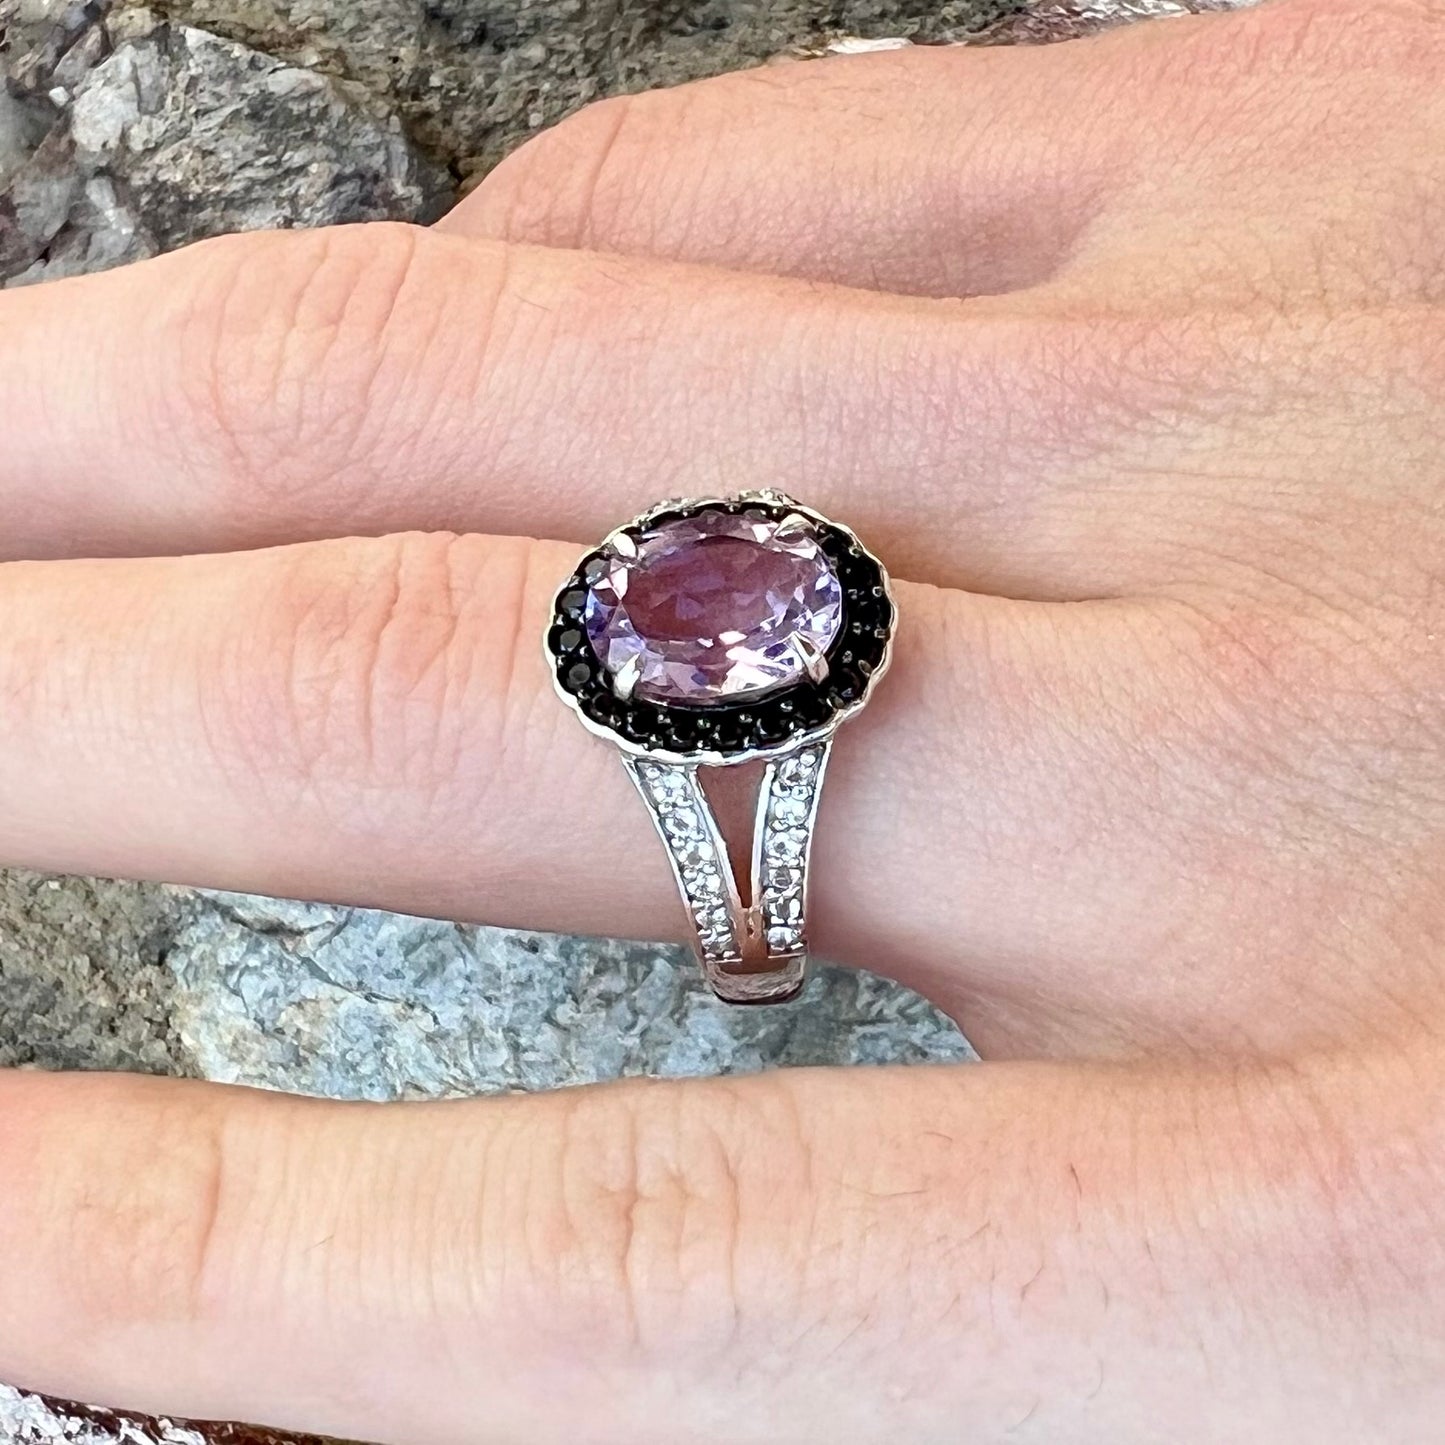 Sterling silver ladies' ring made with Rose de France amethyst set in a black spinel halo with white topaz accents.